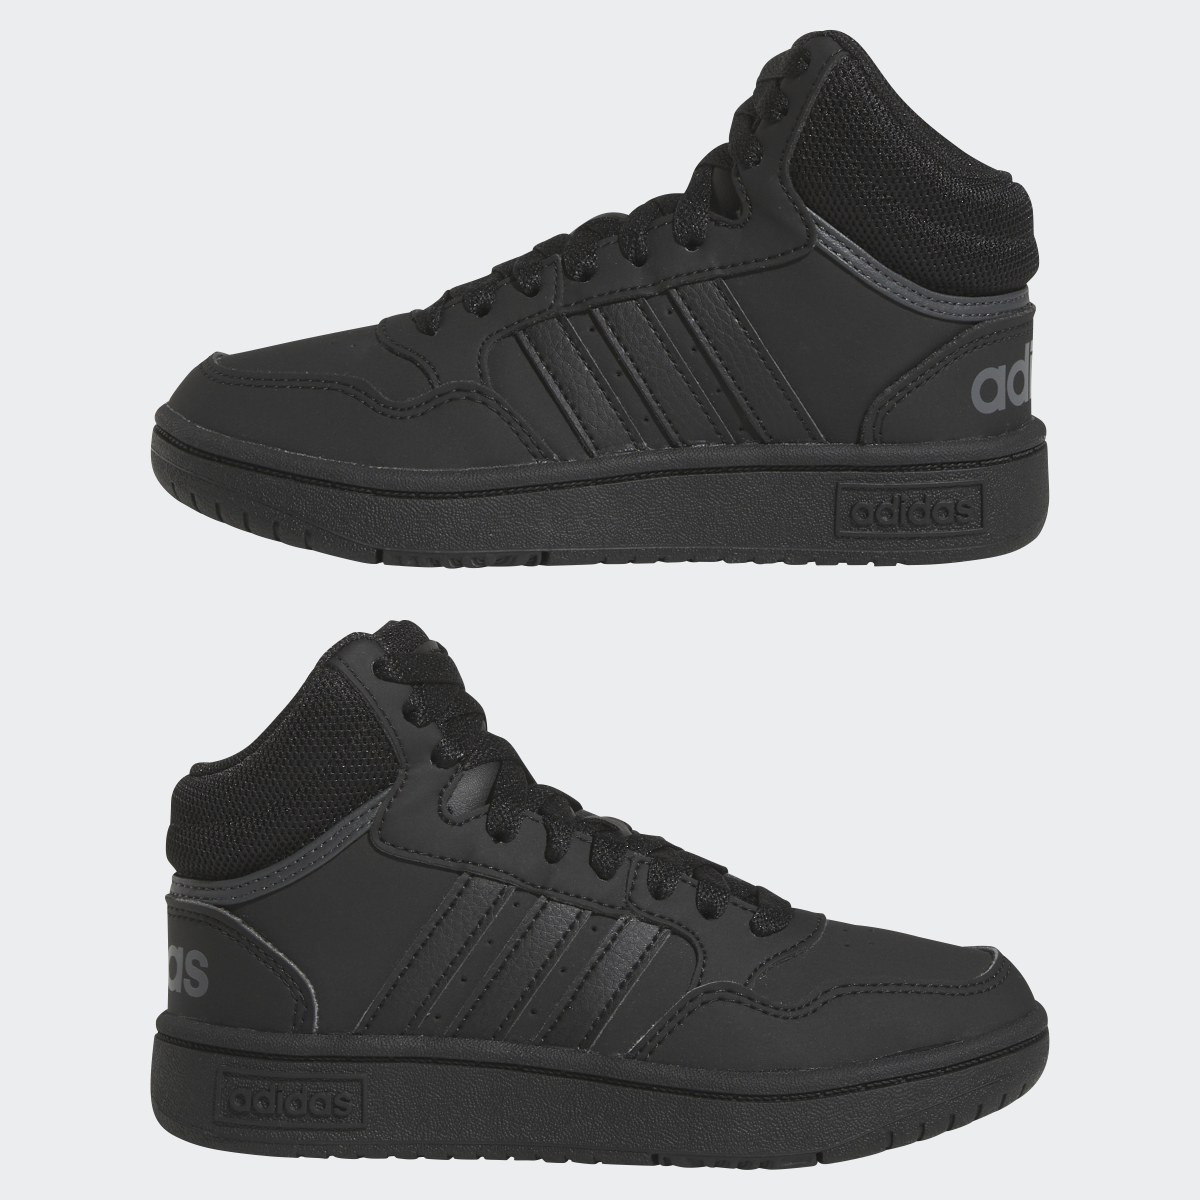 Adidas Hoops Mid Shoes. 8